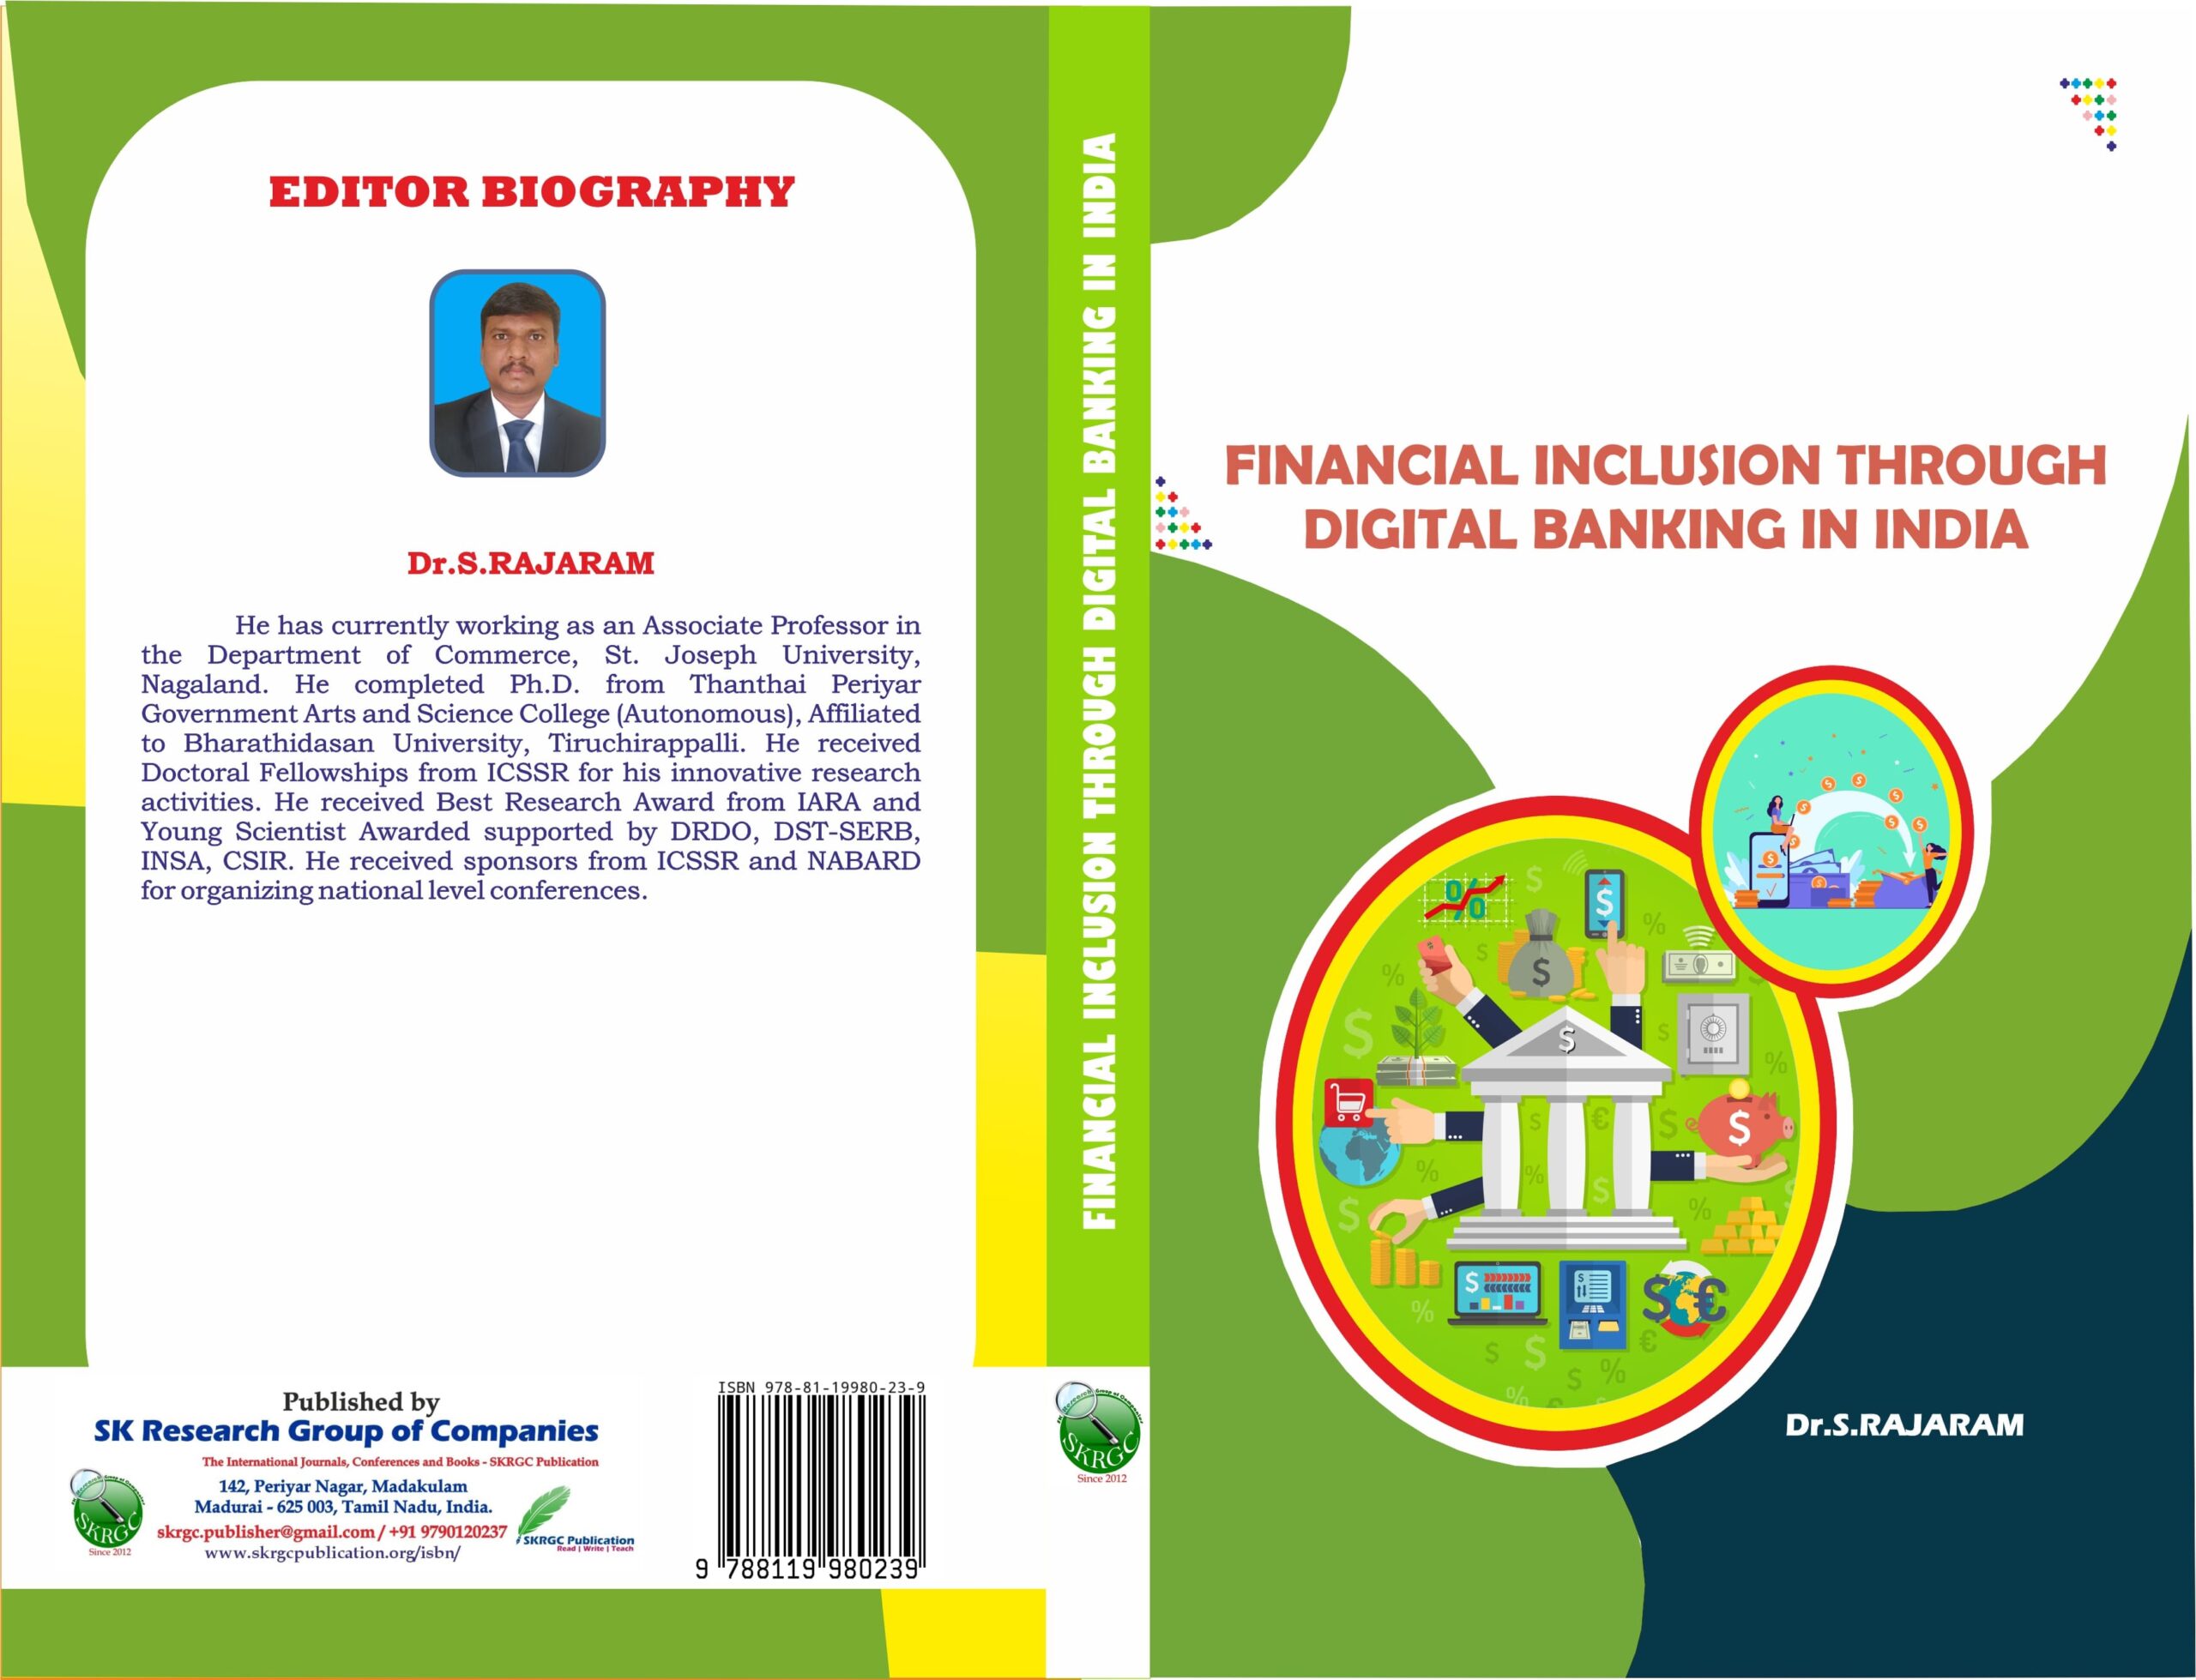 Financial Inclusion Through Digital Banking in India